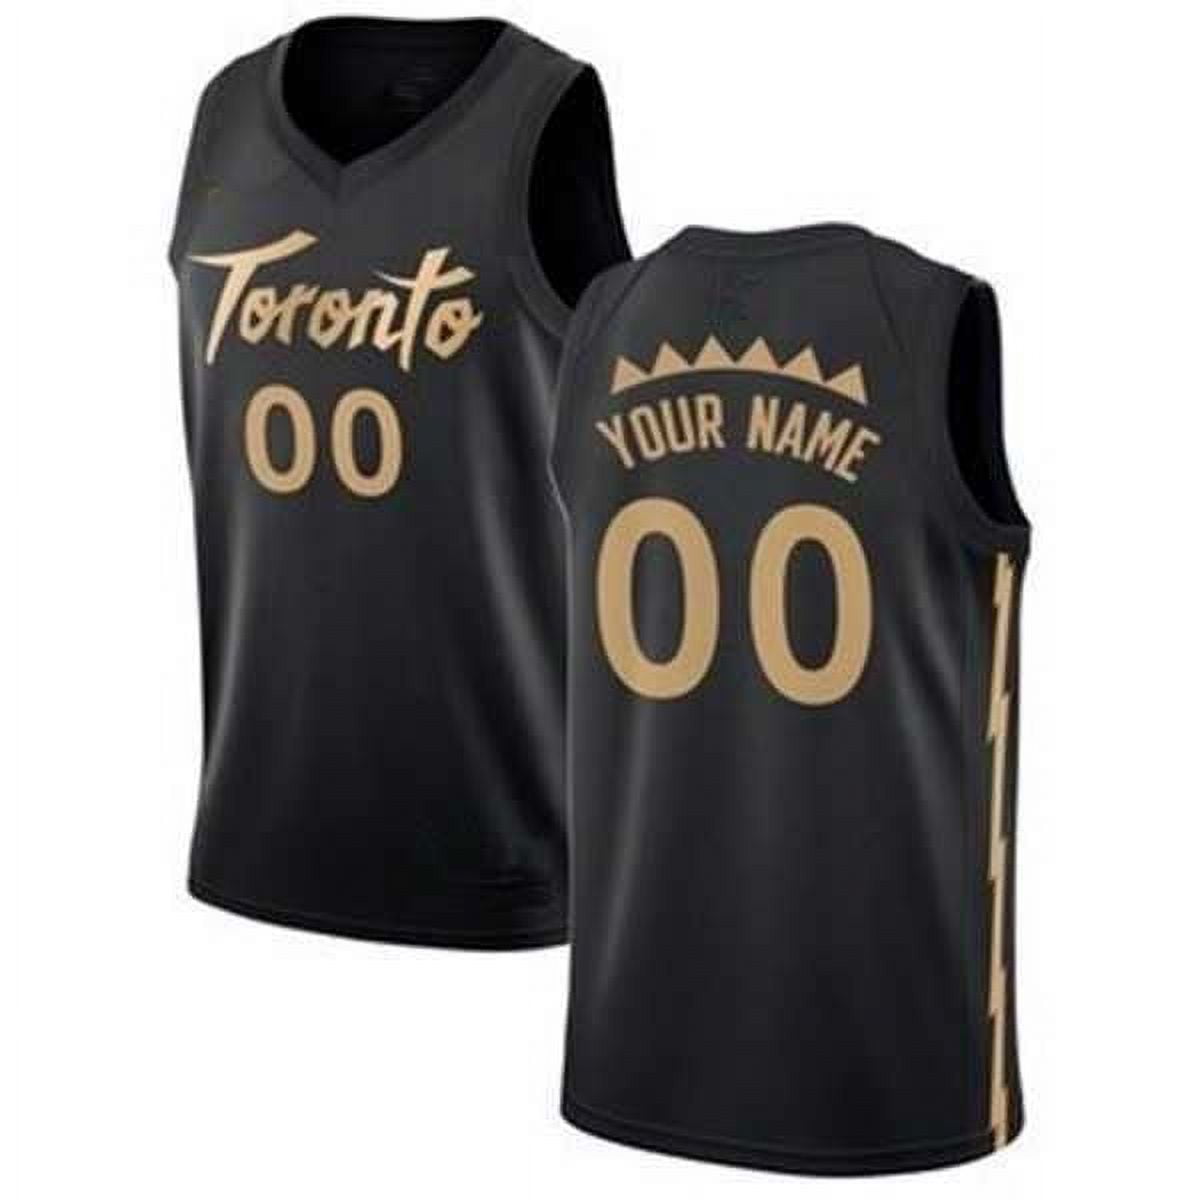 nba jersey with my name